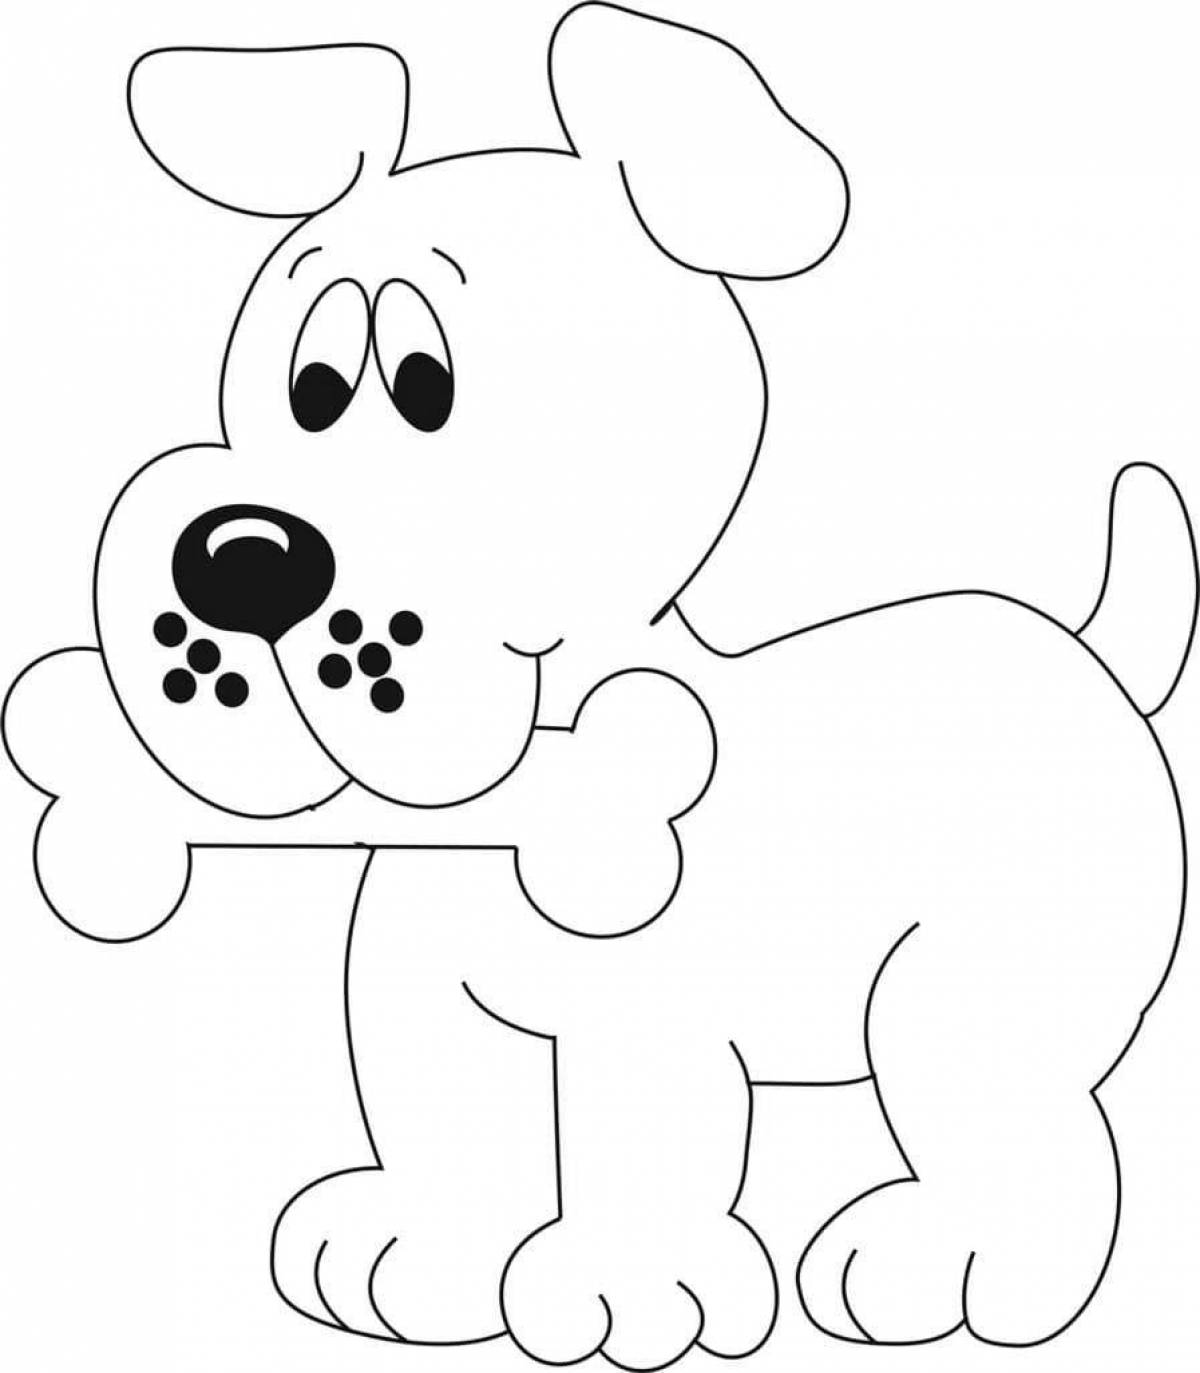 Colorful dog coloring book